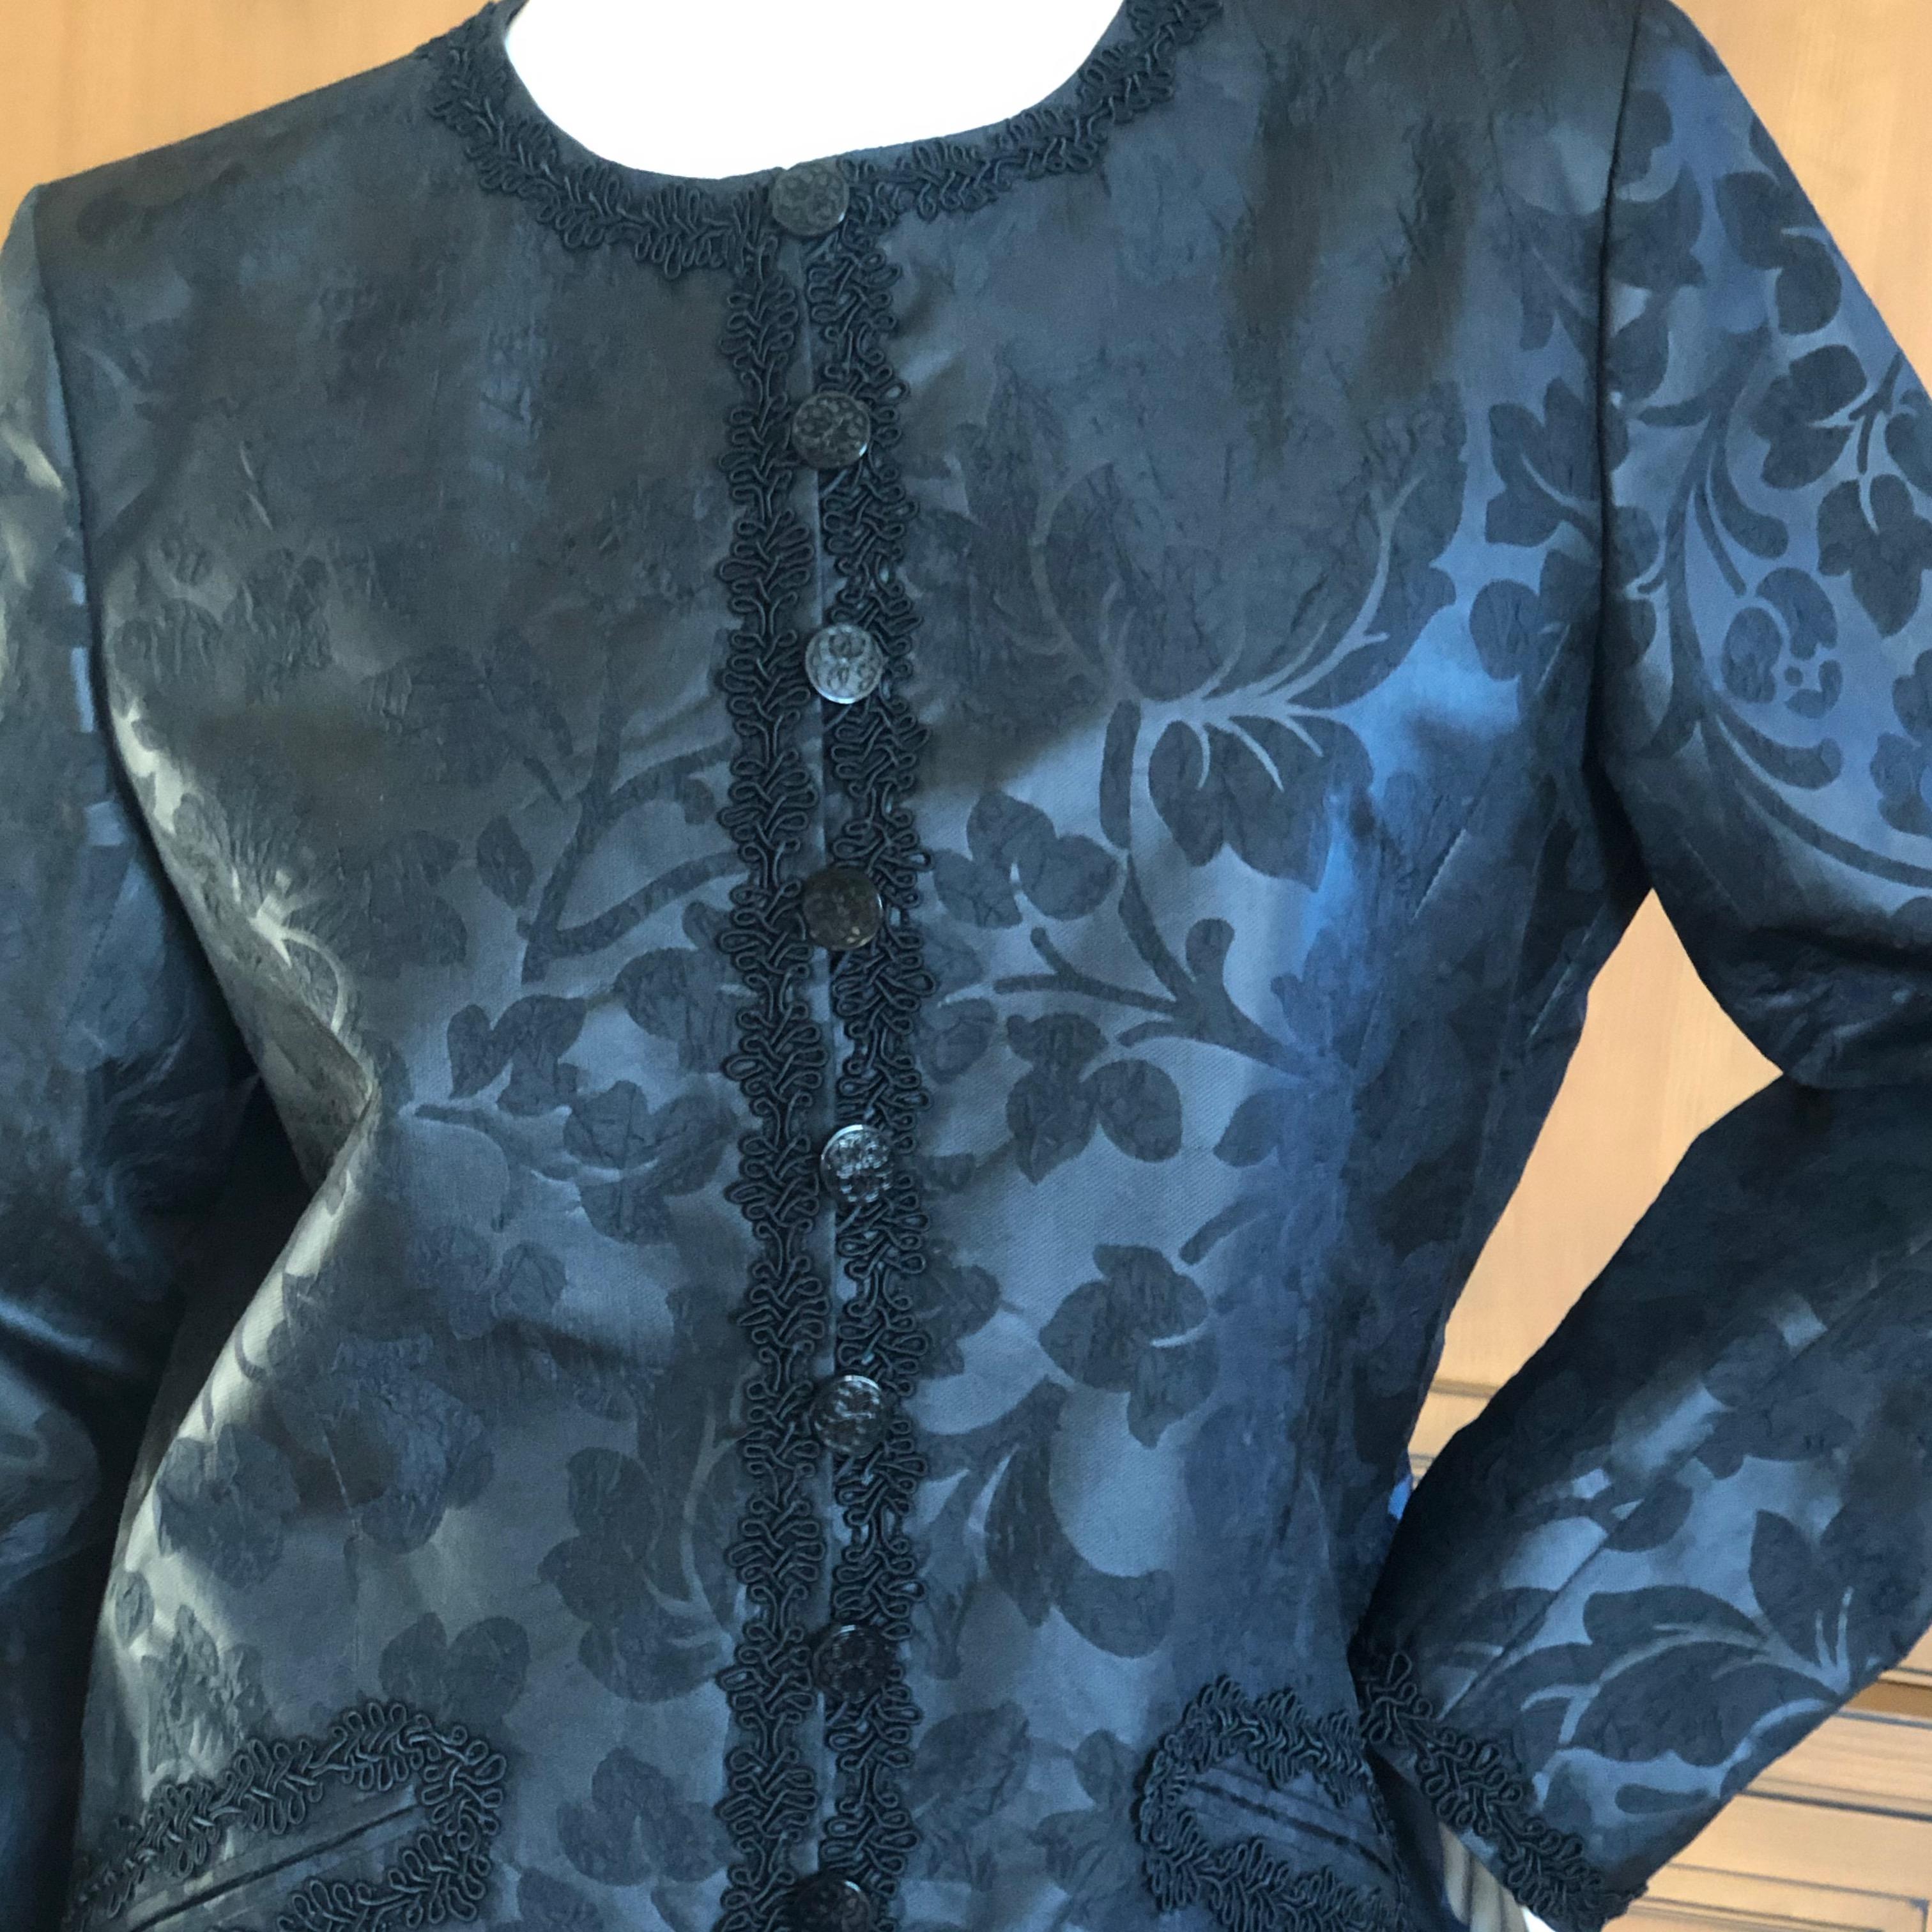 Yves Saint Laurent Vintage 1980's Black Brocade Jacket with Soutache Piping In Excellent Condition For Sale In Cloverdale, CA